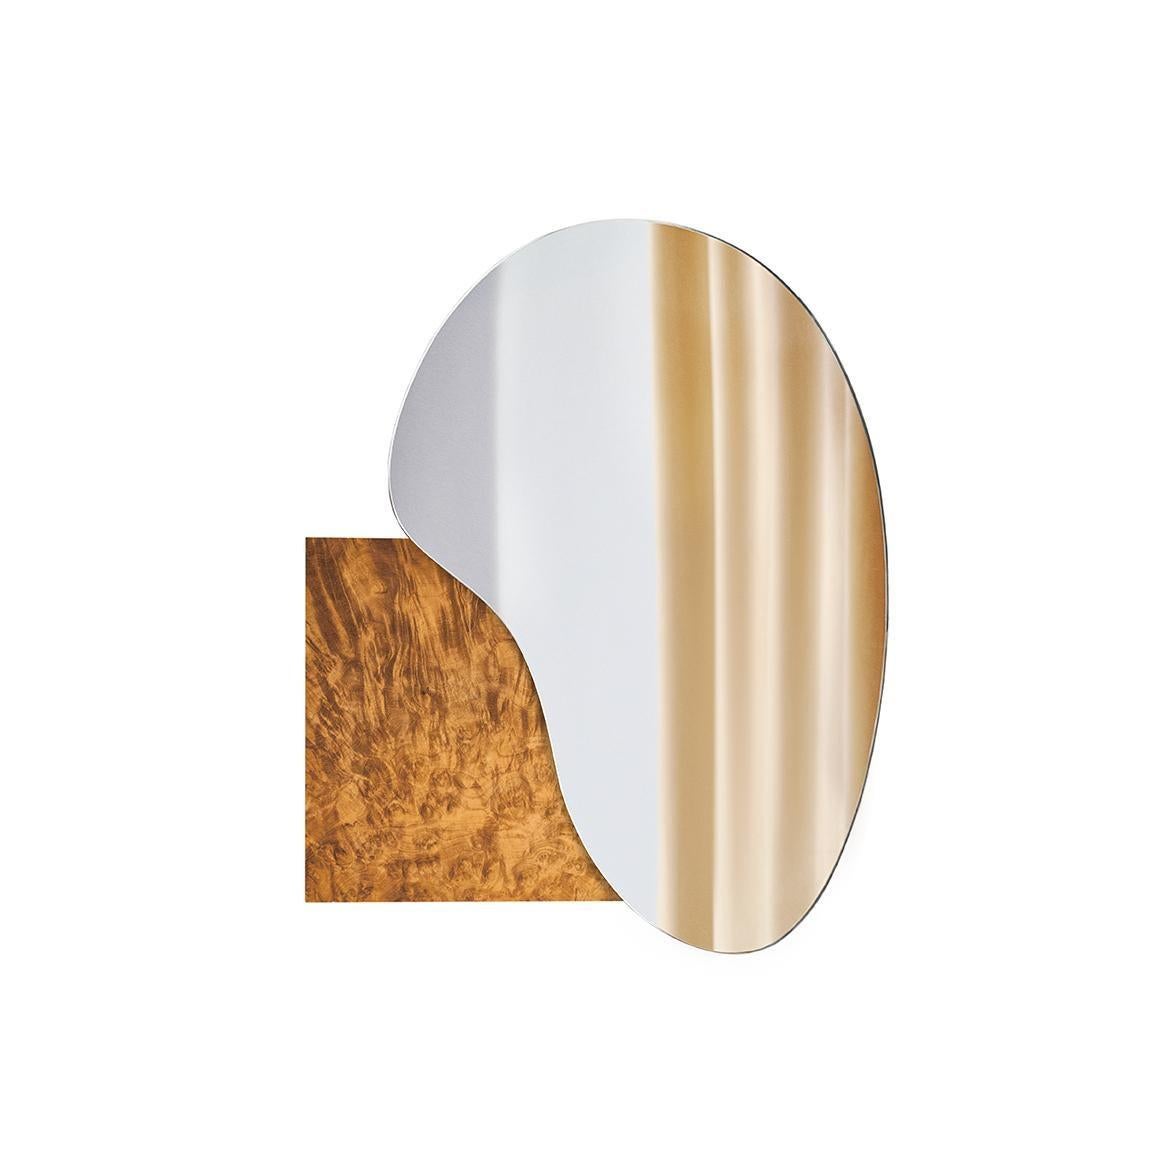 Brand: NOOM
Designers: Maryna Dague & Nathan Baraness

Type of Mirrors: Optiwhite, Black tint mirror, Copper tint mirror
Materials for base: Veneered wood, Madrona wood veneer, Burned steel, Stainless steel / Hand brushed stainless steel, Brushed